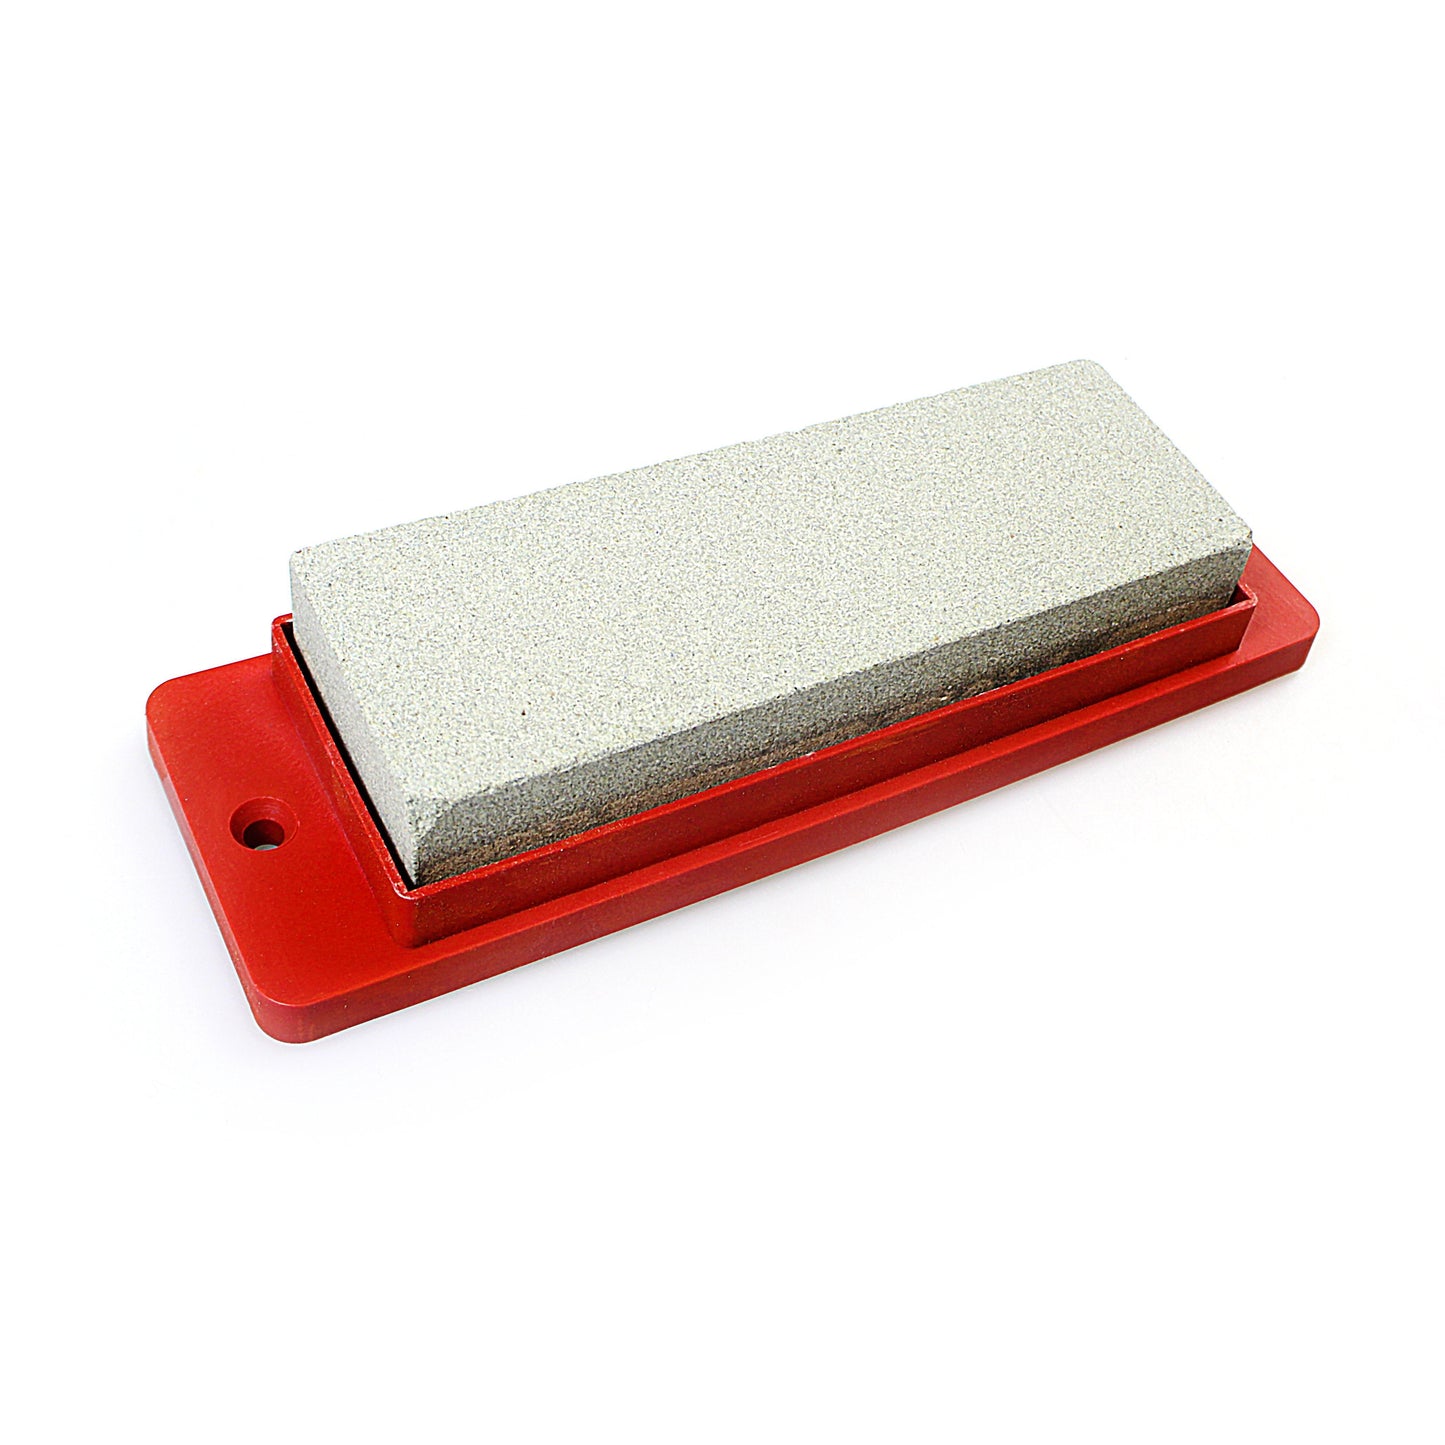 6" Sharpening Stone Diy Home 0618 (Parcel Rate)